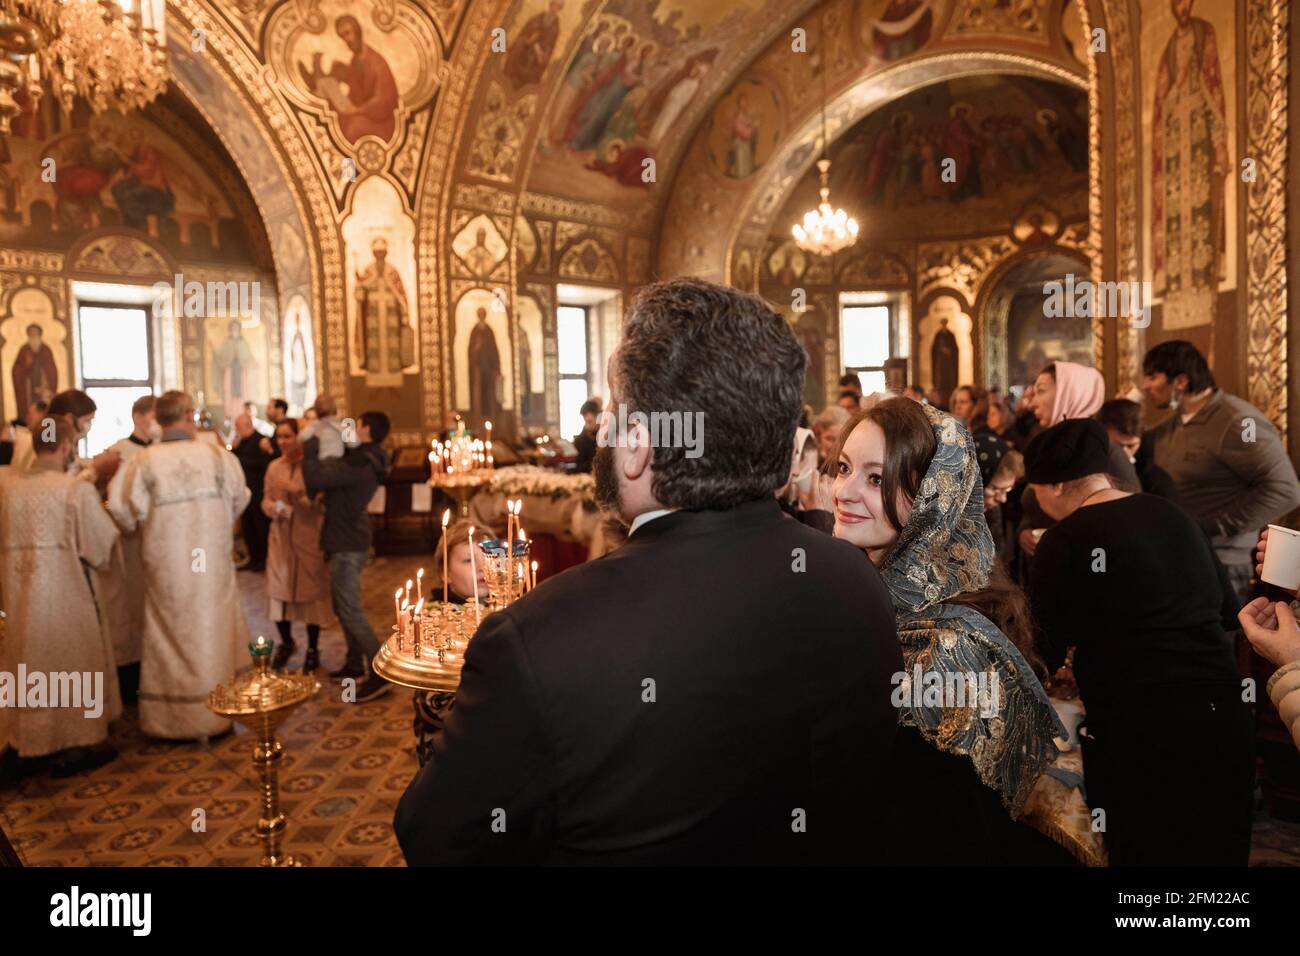 Grand Duke George Mikhailovich of Russia and his fiancee Miss Victoria Romanovna attend the traditional Easter Mass at Vvedensky Temple, on May 2, 2021 in Moscow, Russia. Photo via DNphotography/ABACAPRESS.COMFirst Orthodox Easter for Miss Victoria Romanovna (Rebecca Virginia Bettarini) since her conversion to the Orthodox Church in 2020 Stock Photo